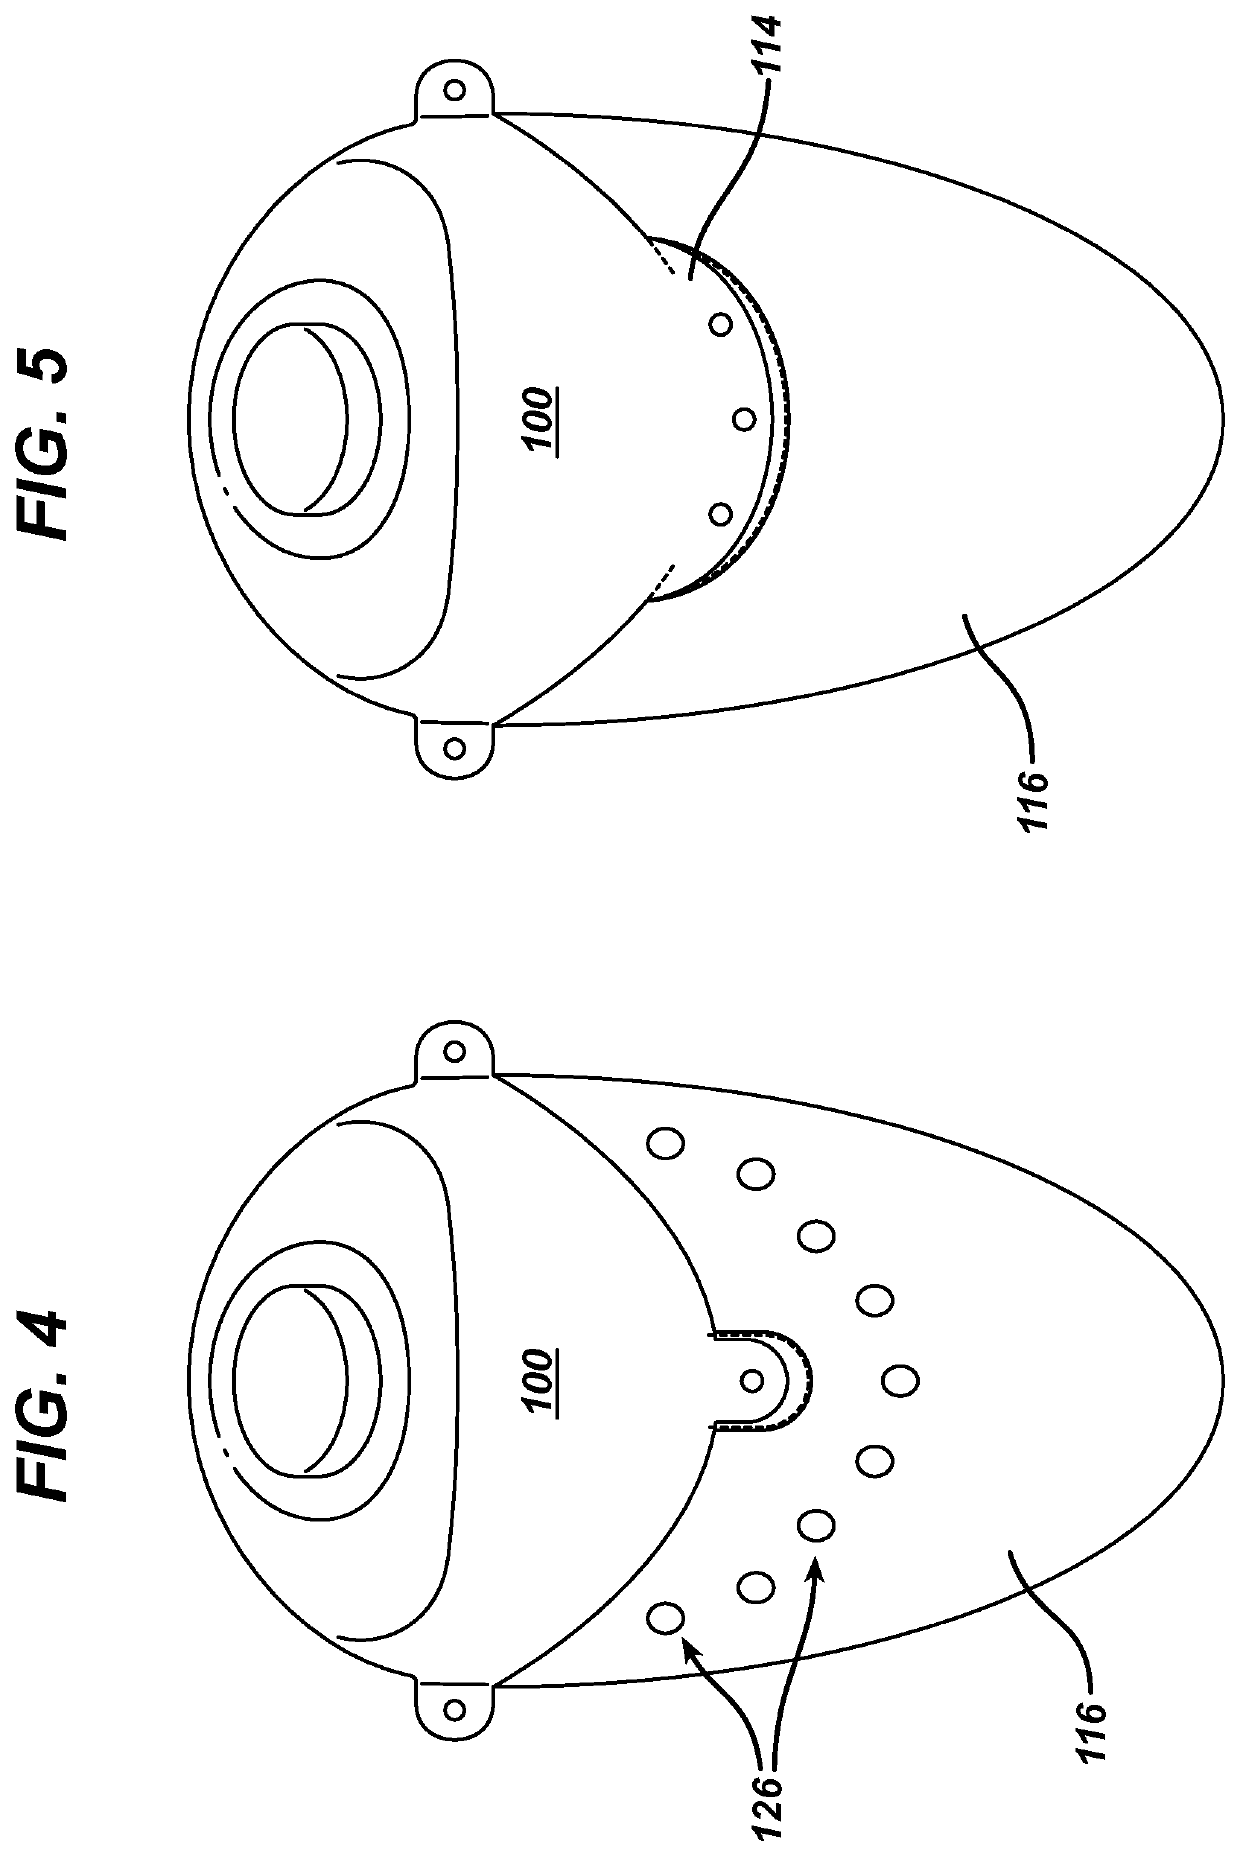 Tissue expander with pectoral attachment